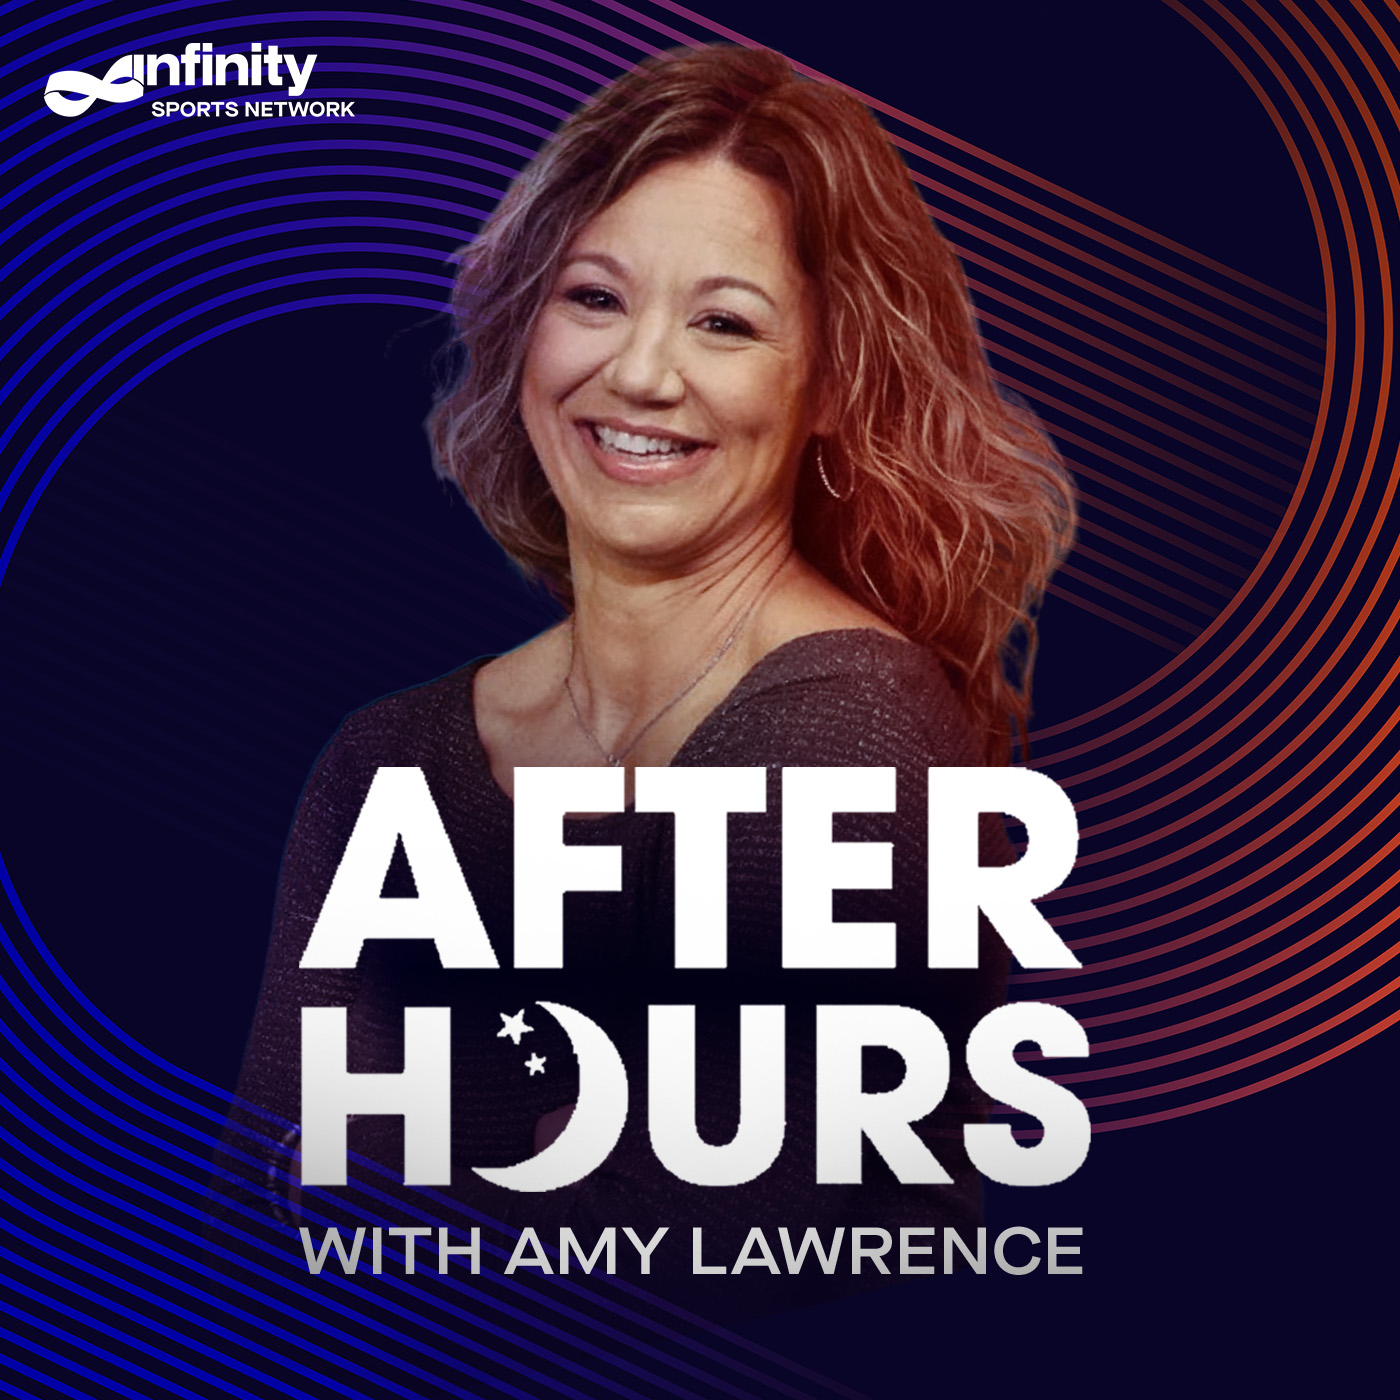 6/10/20 After Hours with Amy Lawrence PODCAST: Hour 3